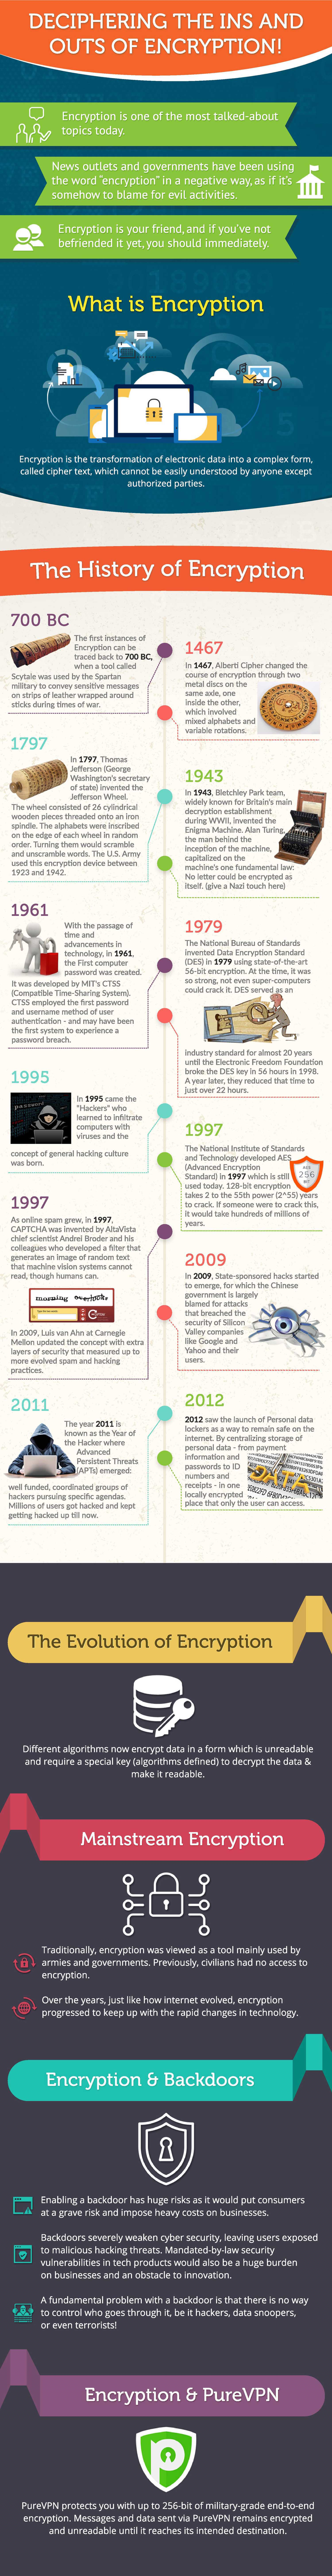 Deciphering the History of Encryption